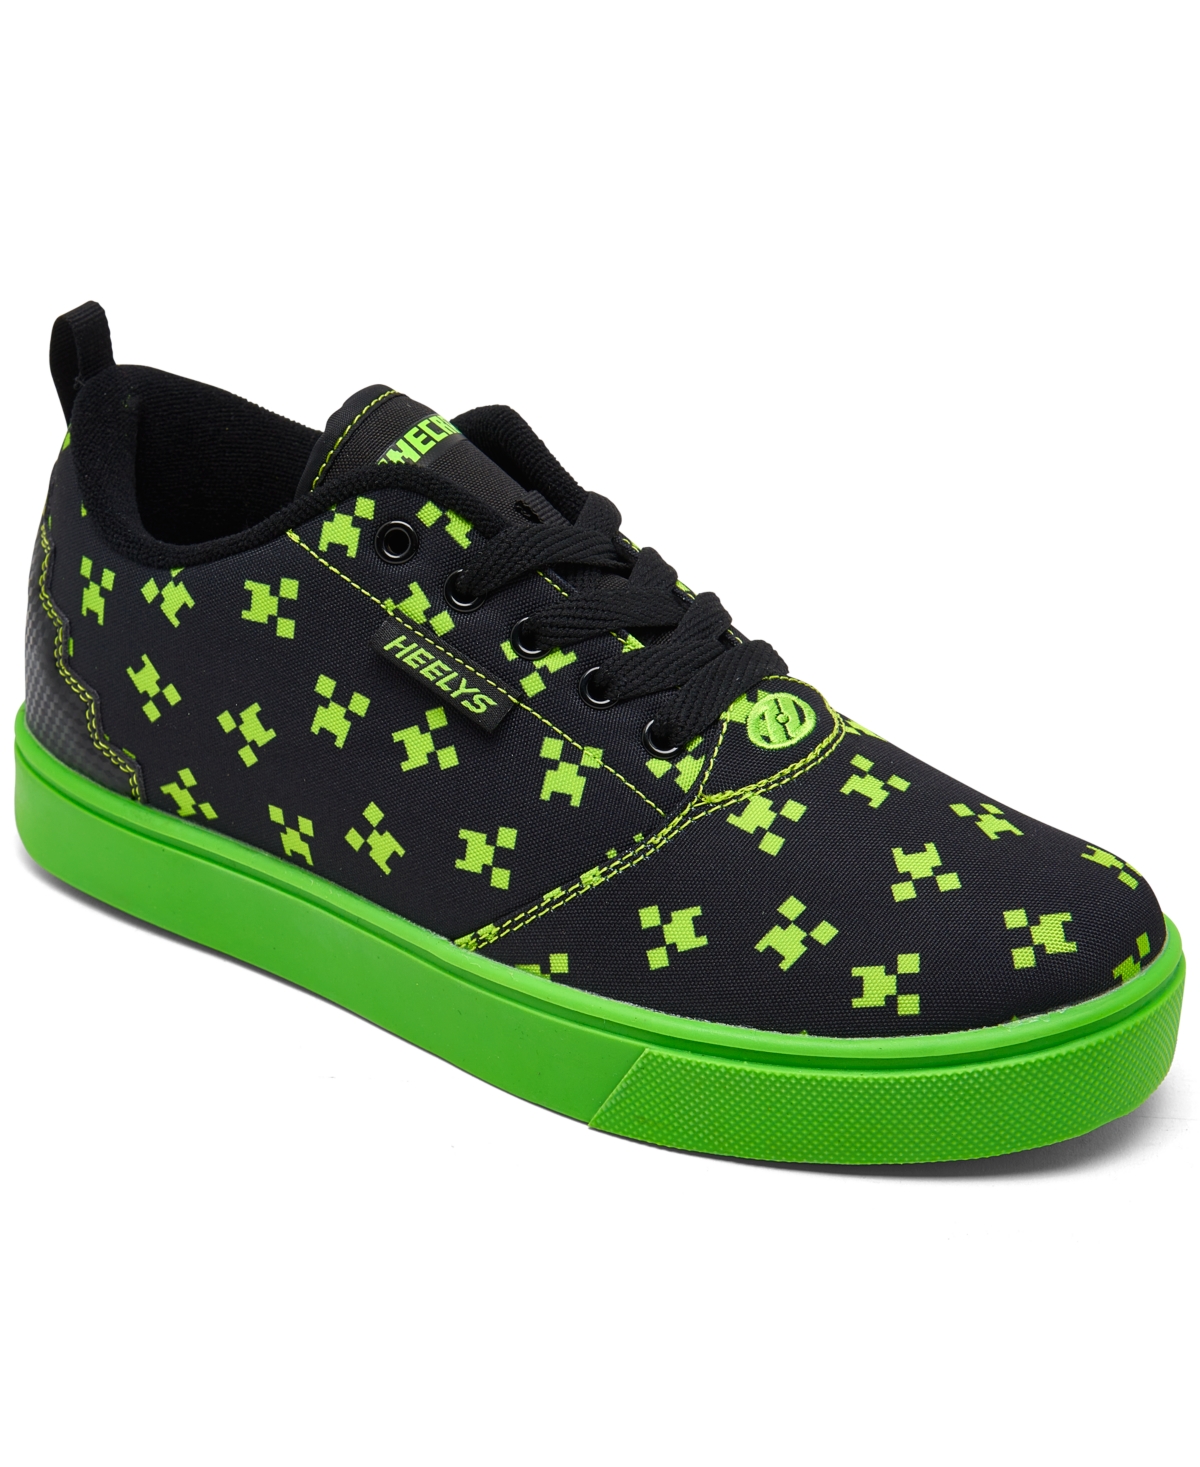 Heelys Big Kids Minecraft Pro 20 Wheeled Skate Casual Sneakers From Finish Line In Black,green